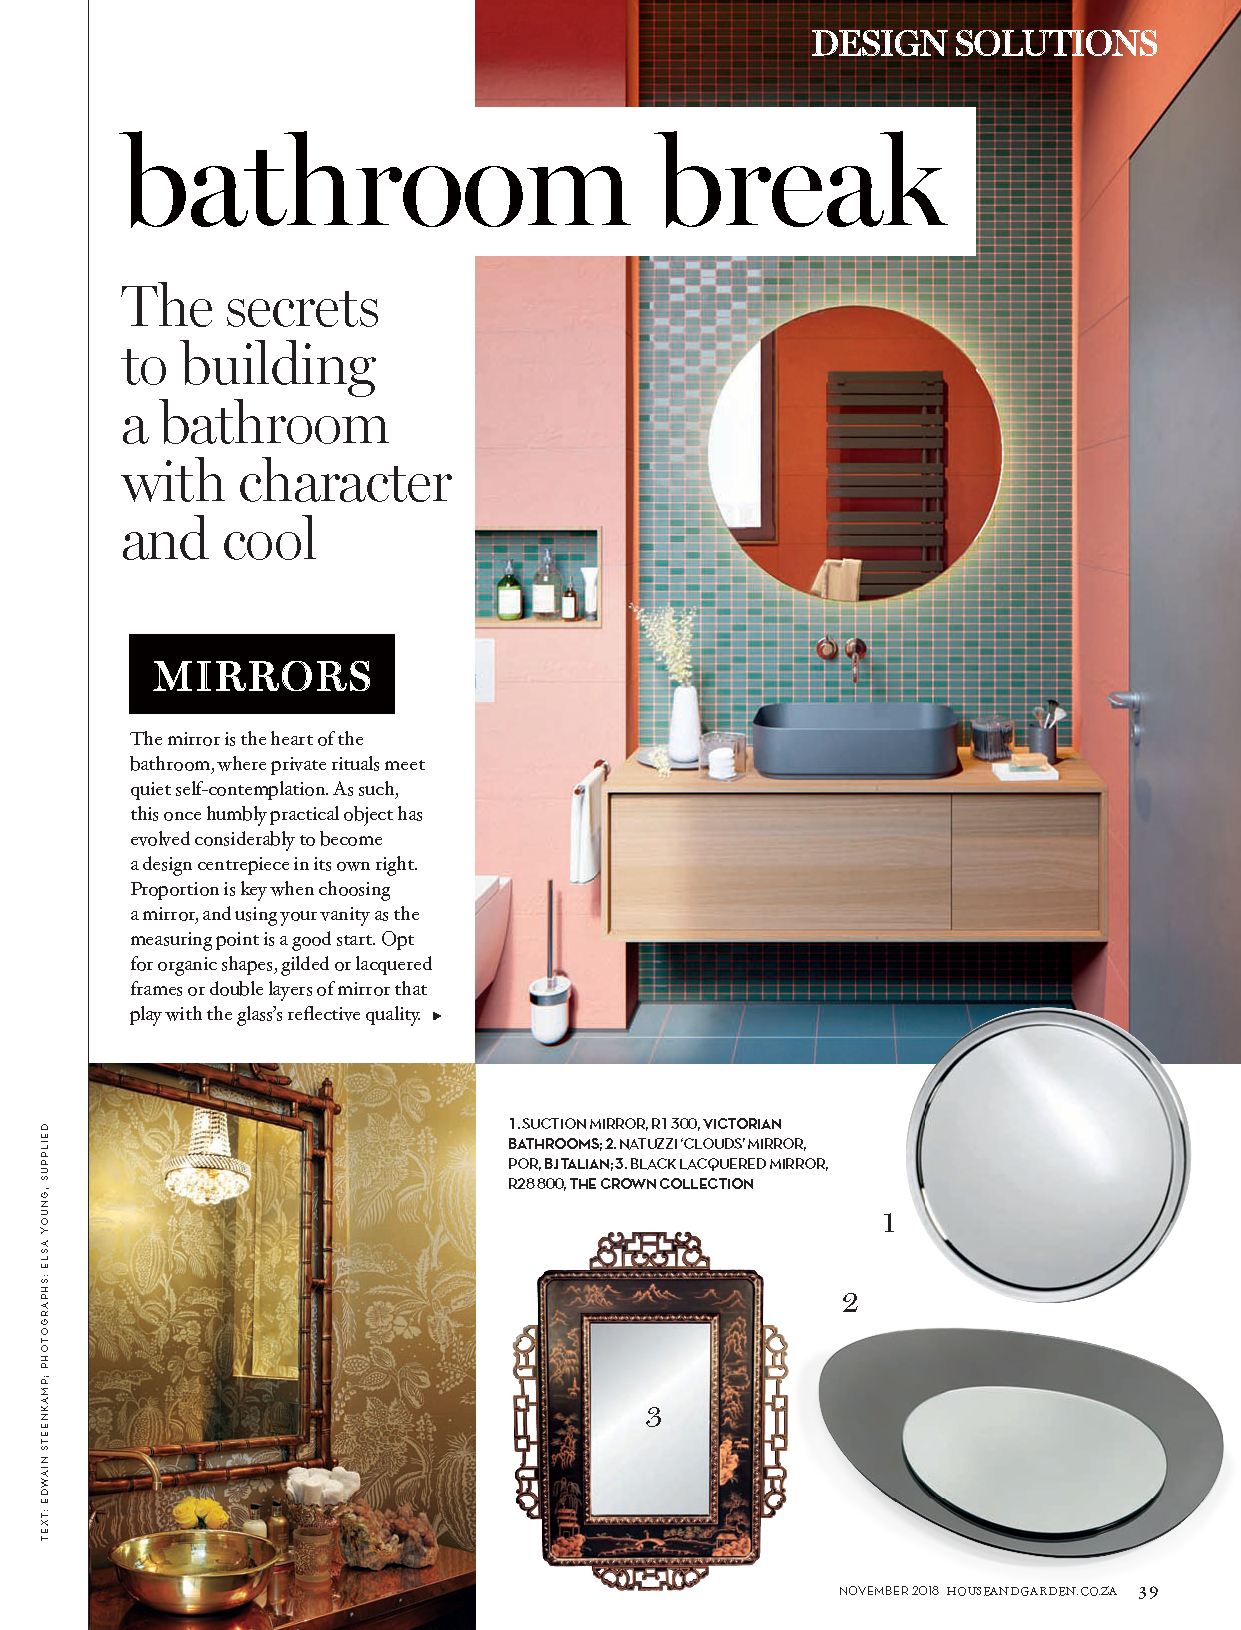 H&G Nov 18_DesignSolutions_Bathrooms_Page_1.png